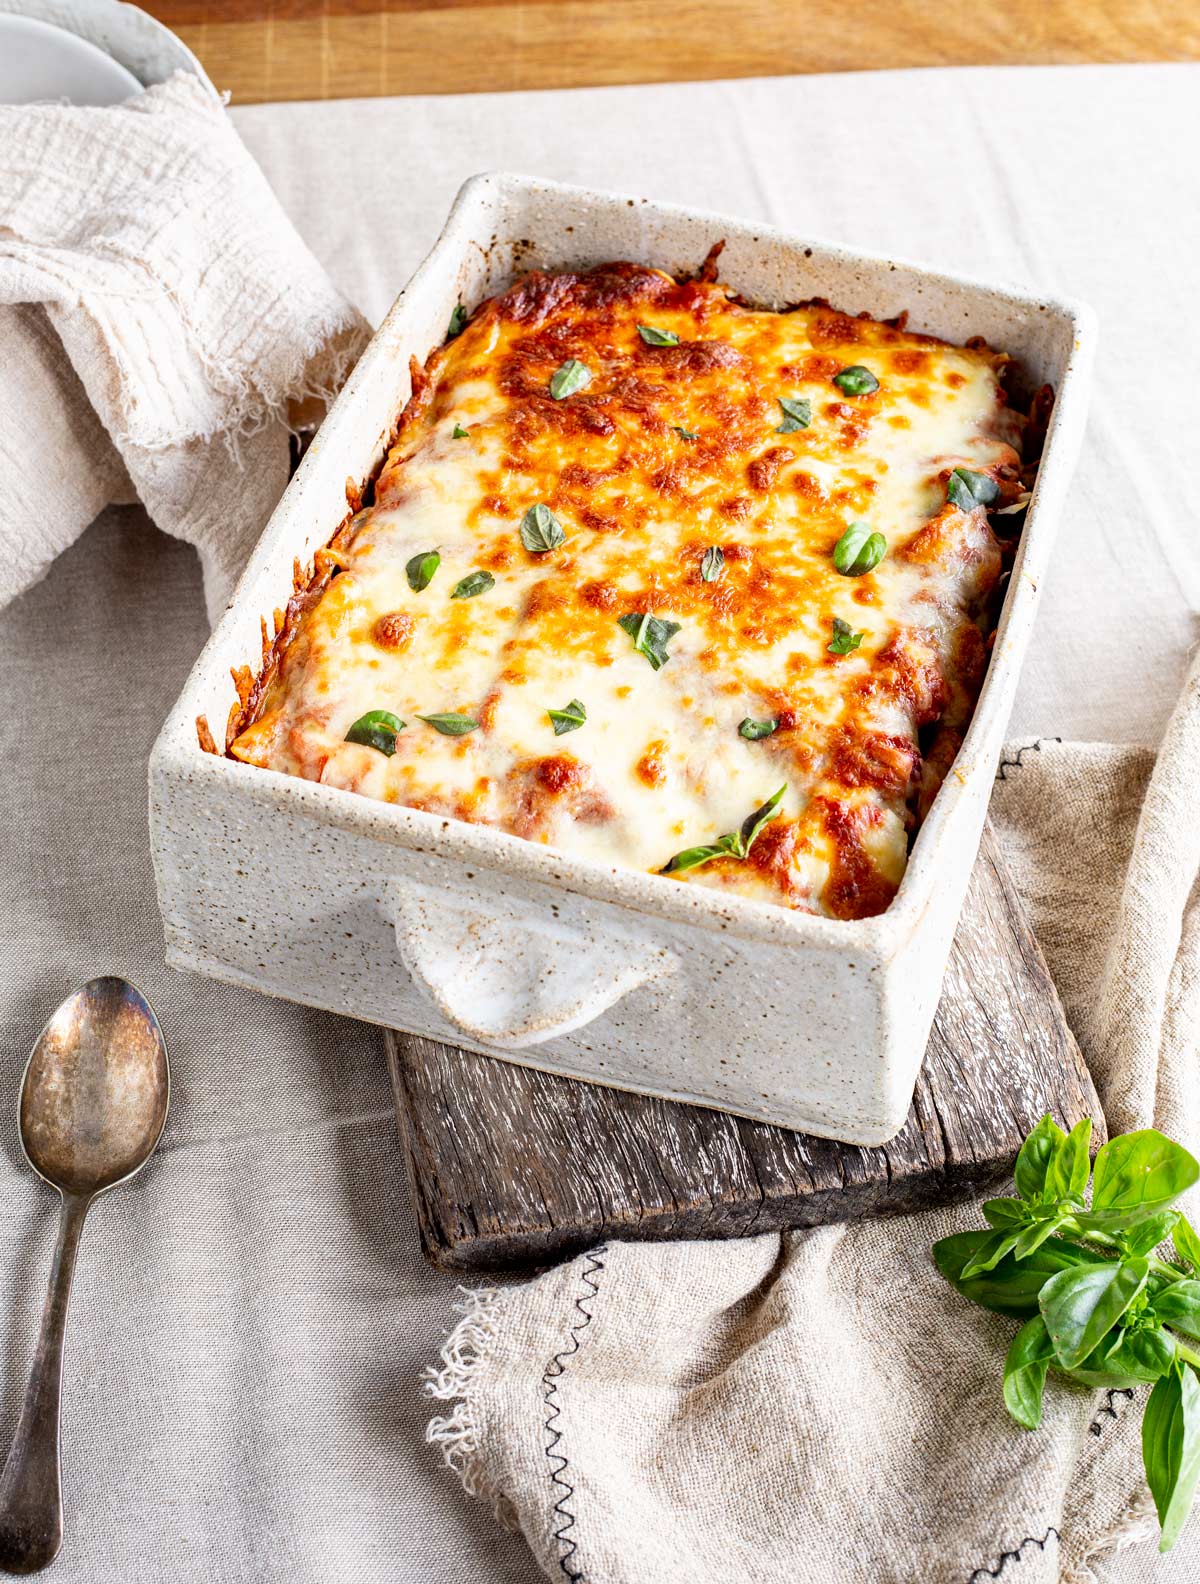 a large serving dish filled with baked pasta with basil leaves on top